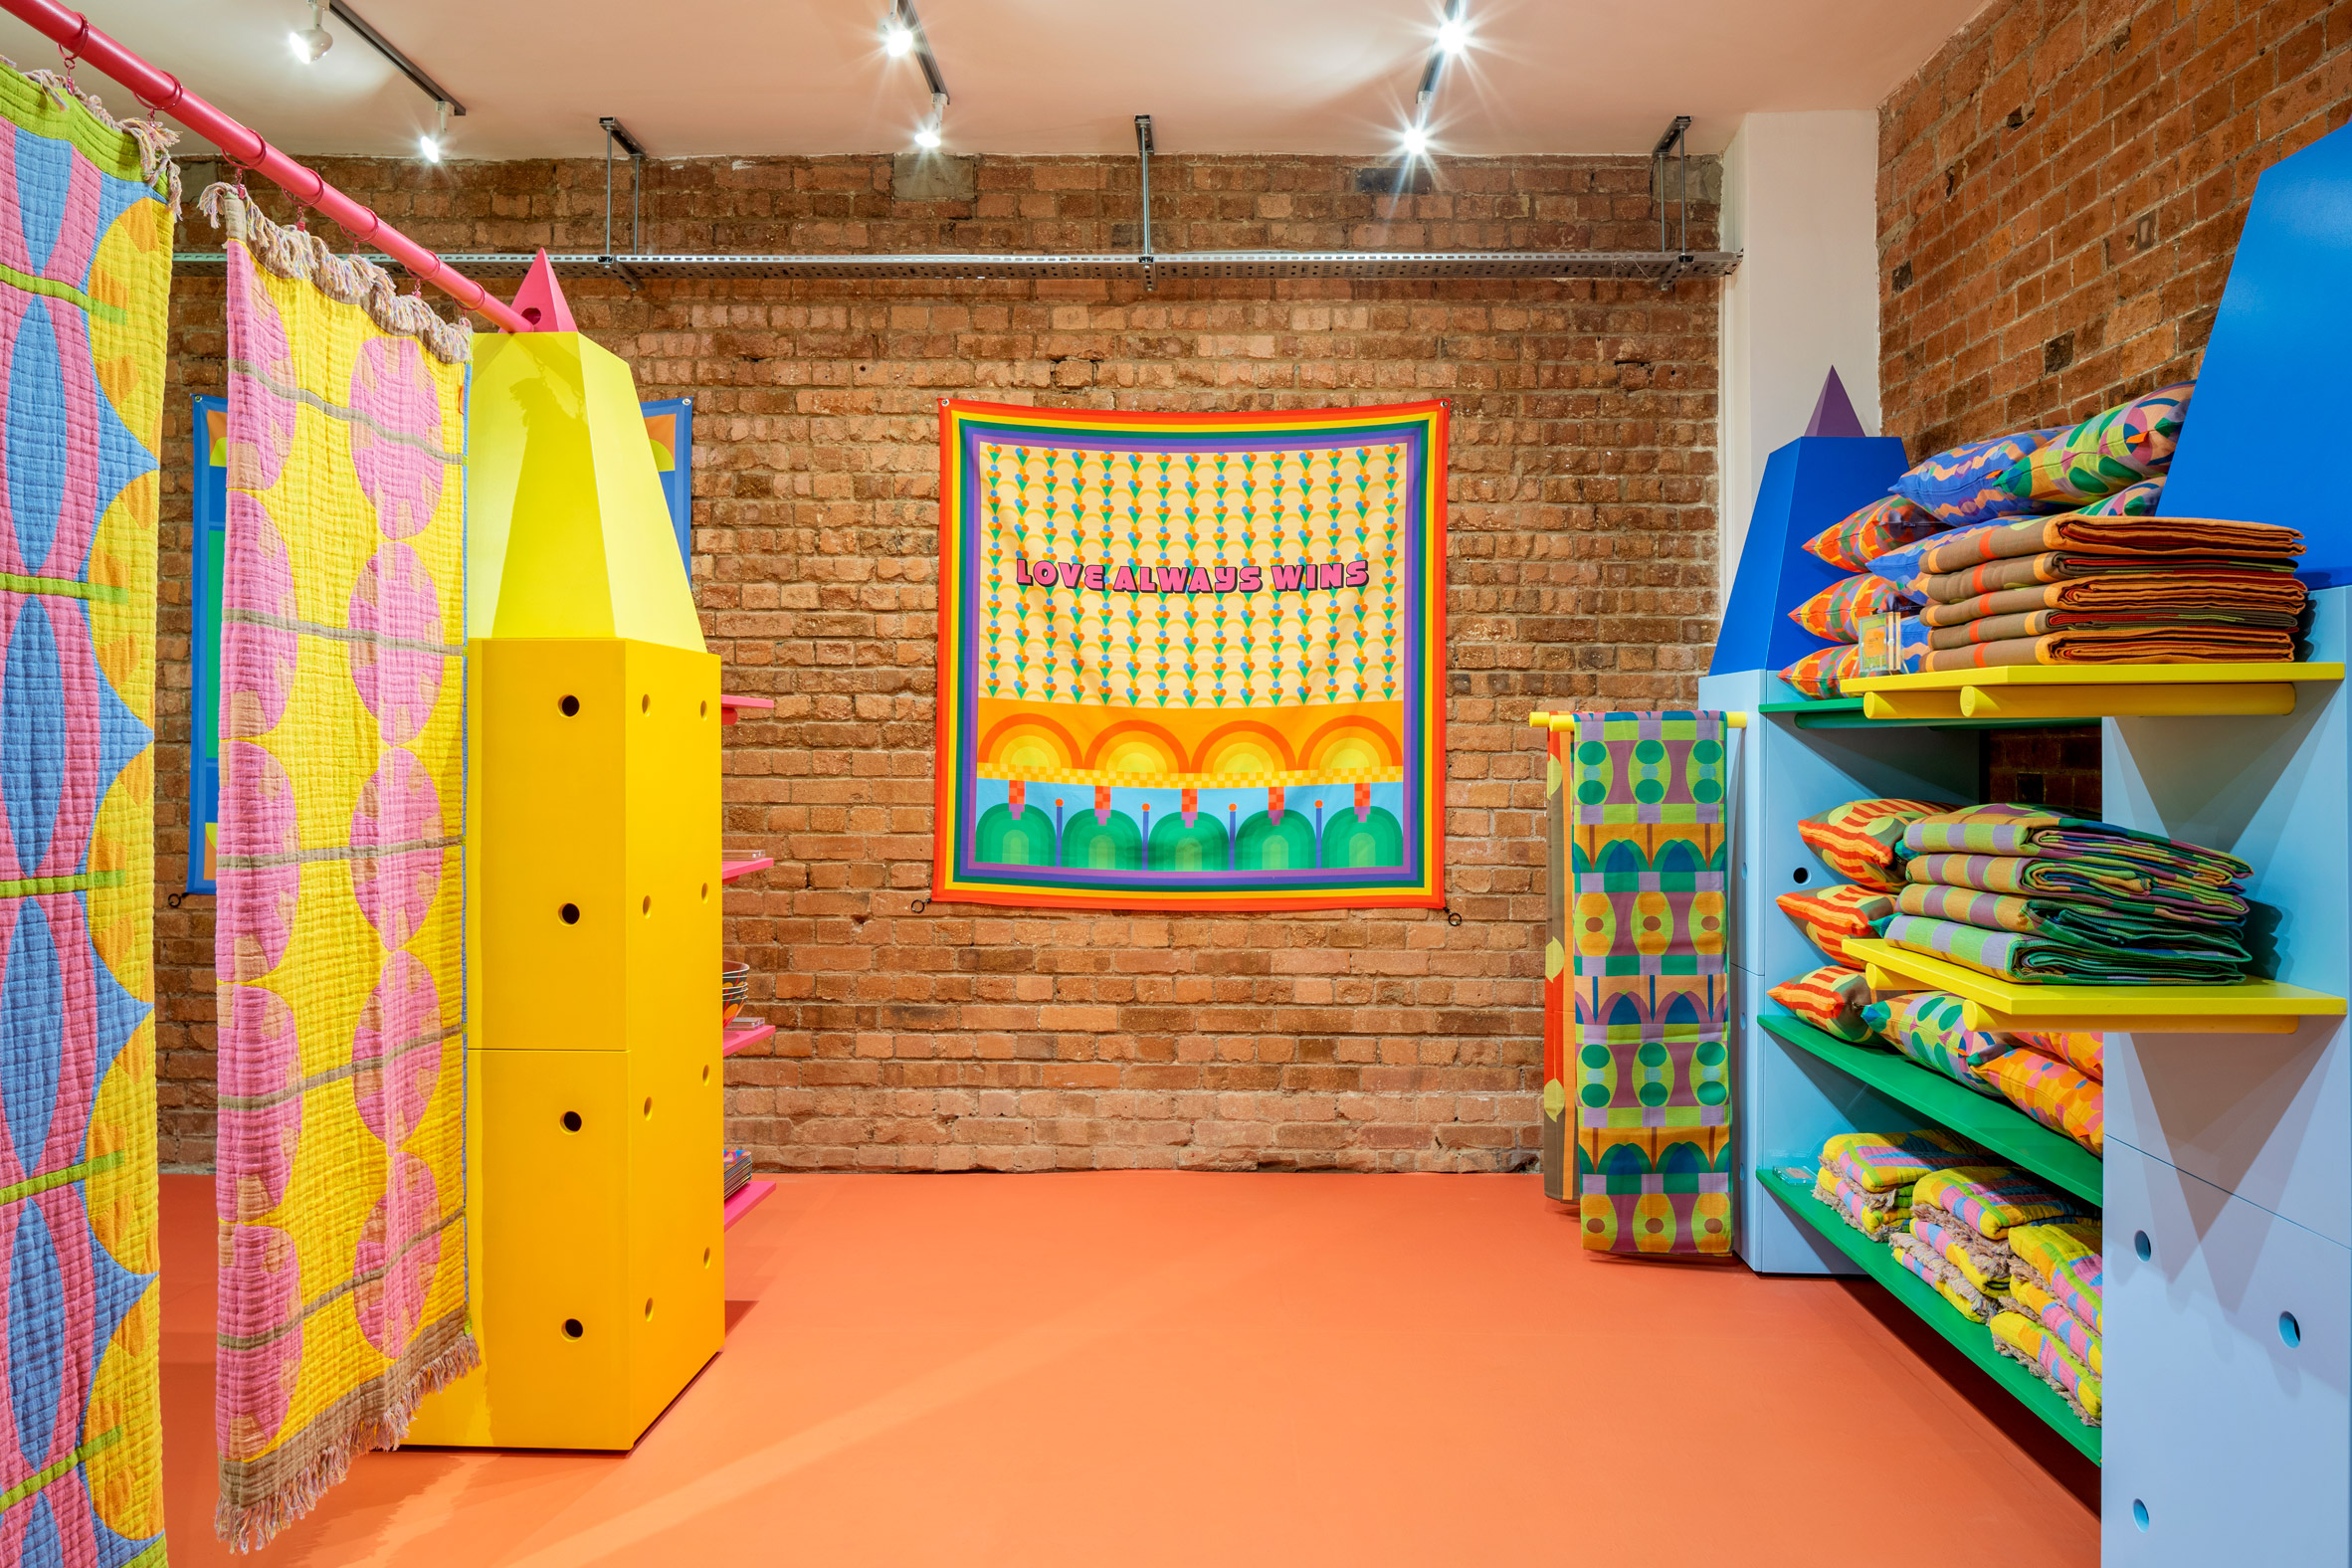 Colourful display stands holding textiles in Colourful clothes rail in Yinka Ilori's London pop-up shop